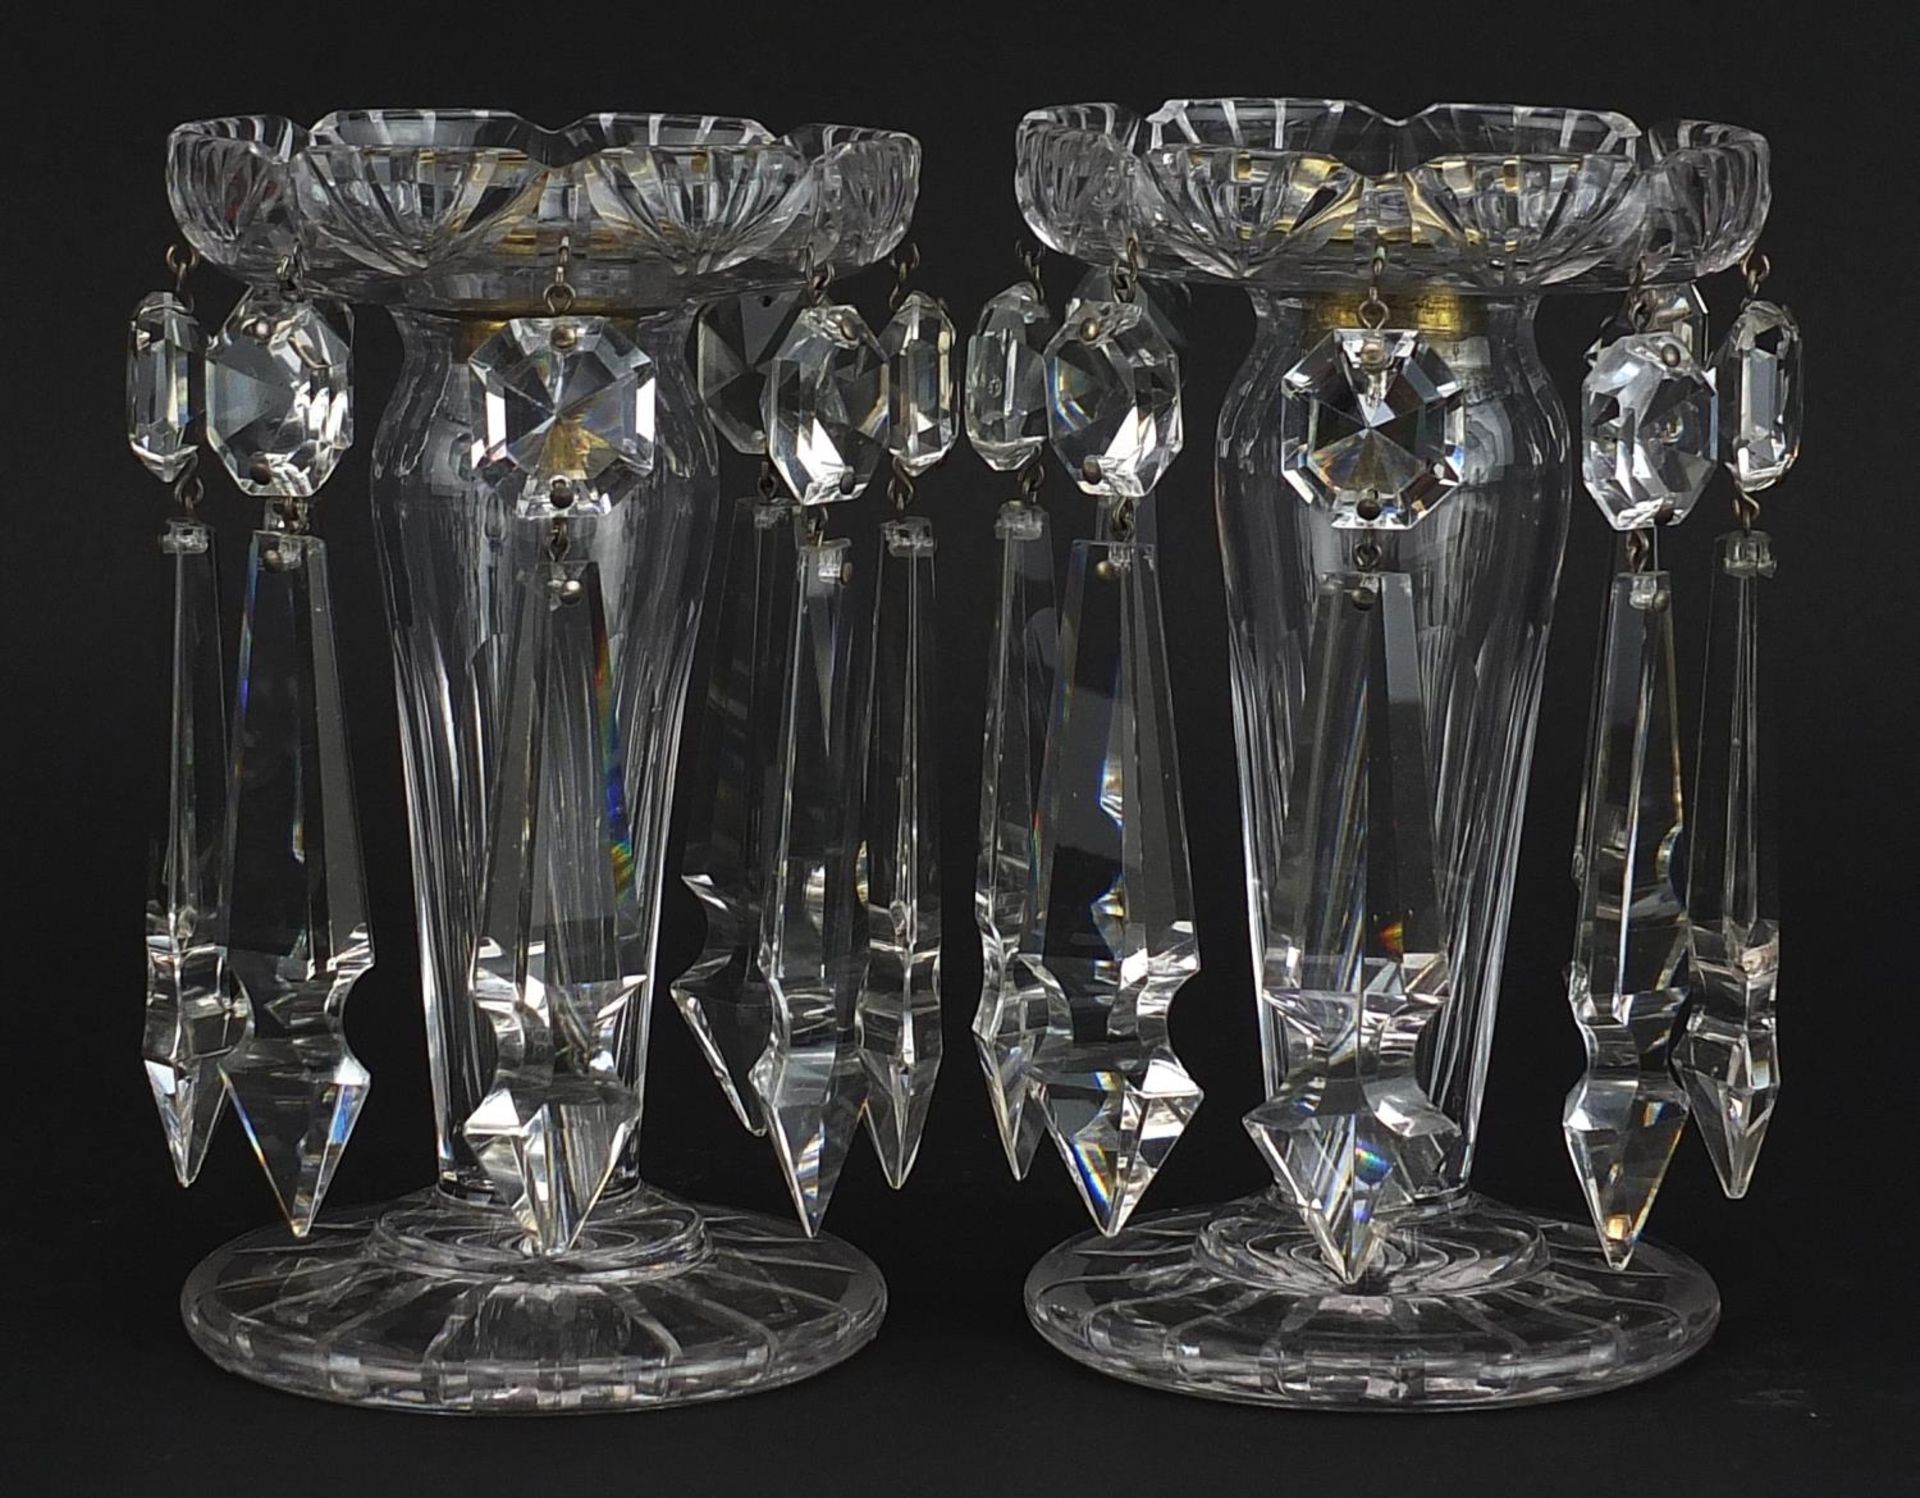 Pair of William IV cut glass lustres with drops, each 15.5cm high - Image 2 of 3